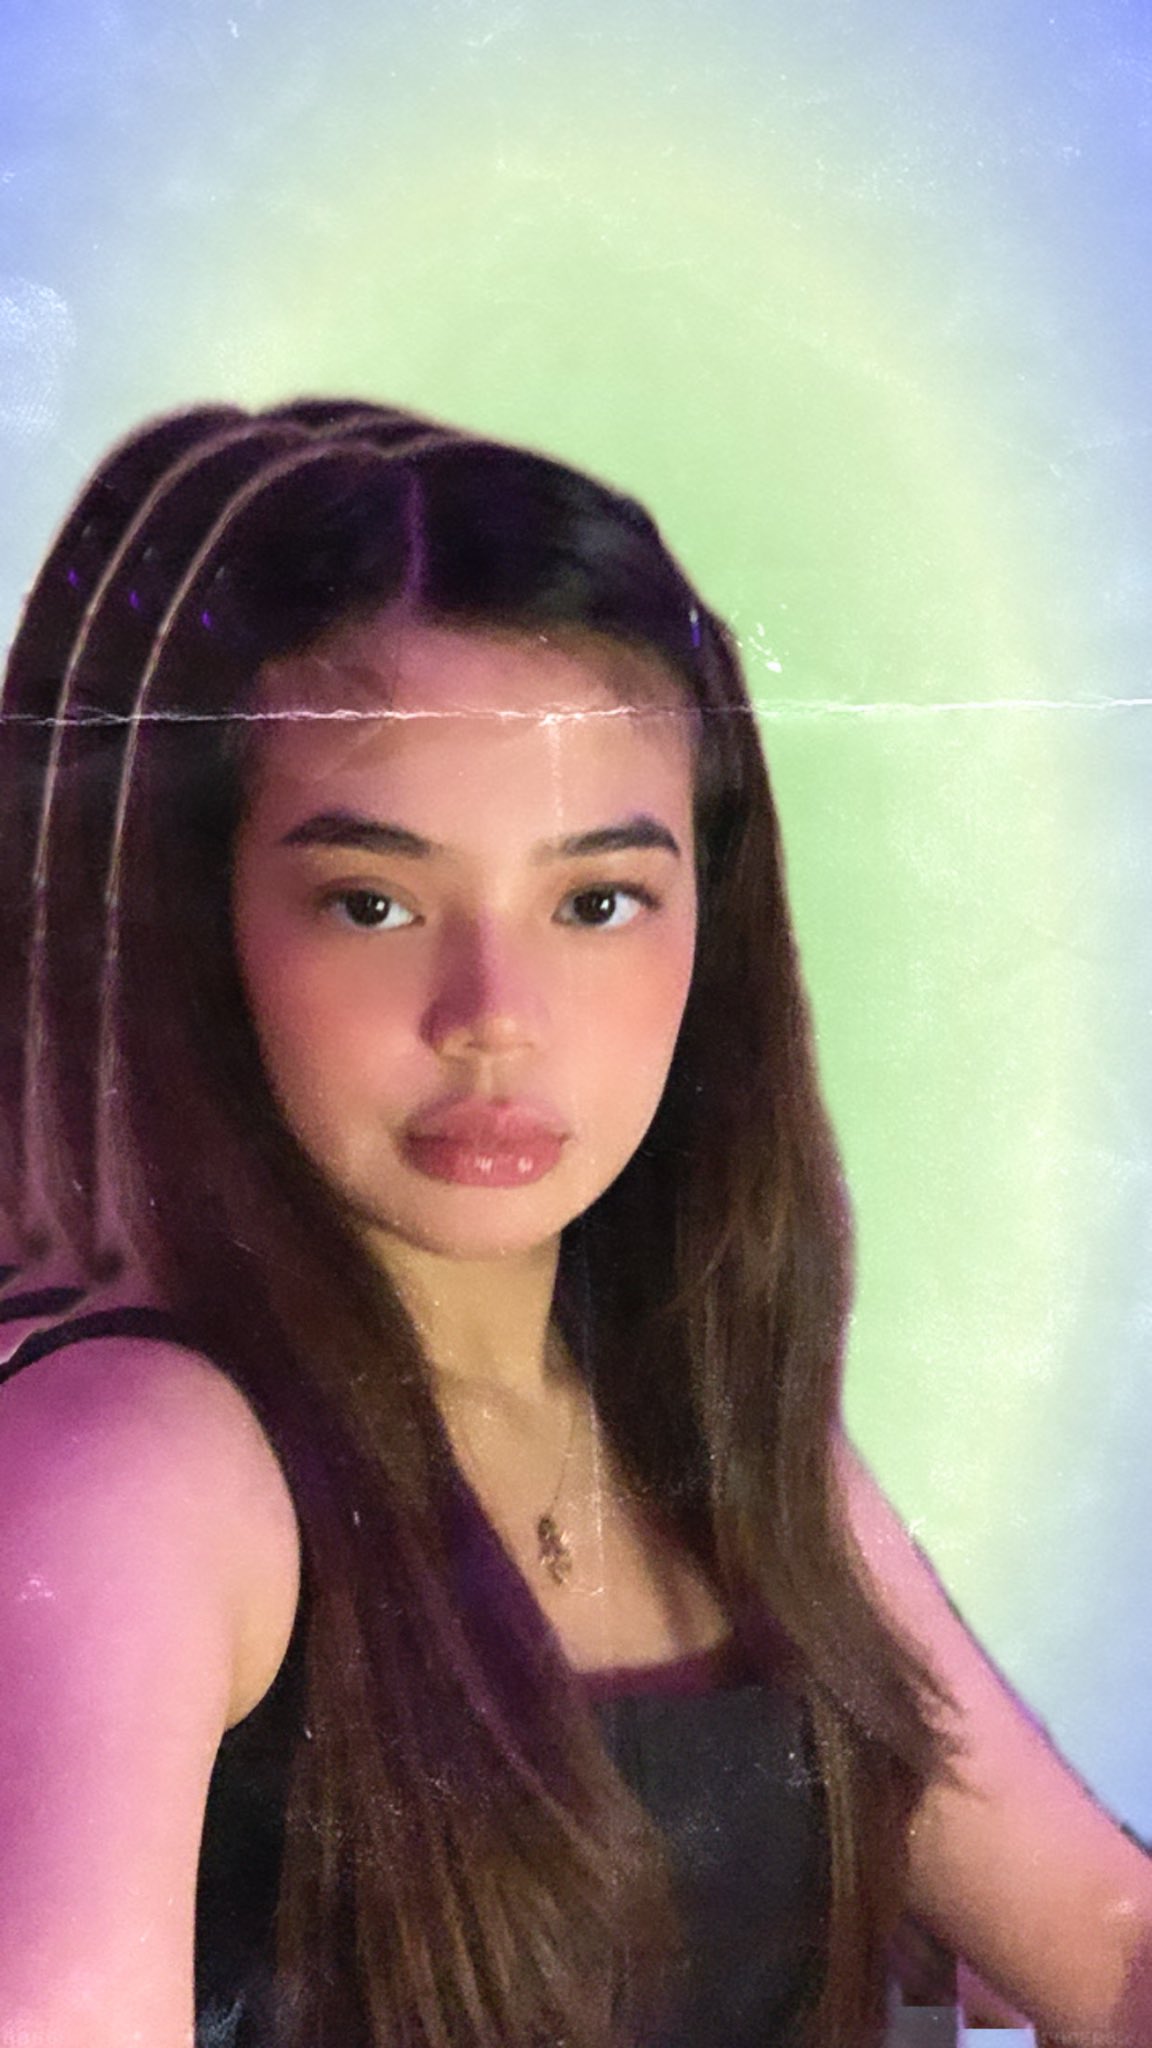 Bianca De Vera 2022: Who Is Her Boyfriend? Details About Her Personal Life, Parents And Net Worth